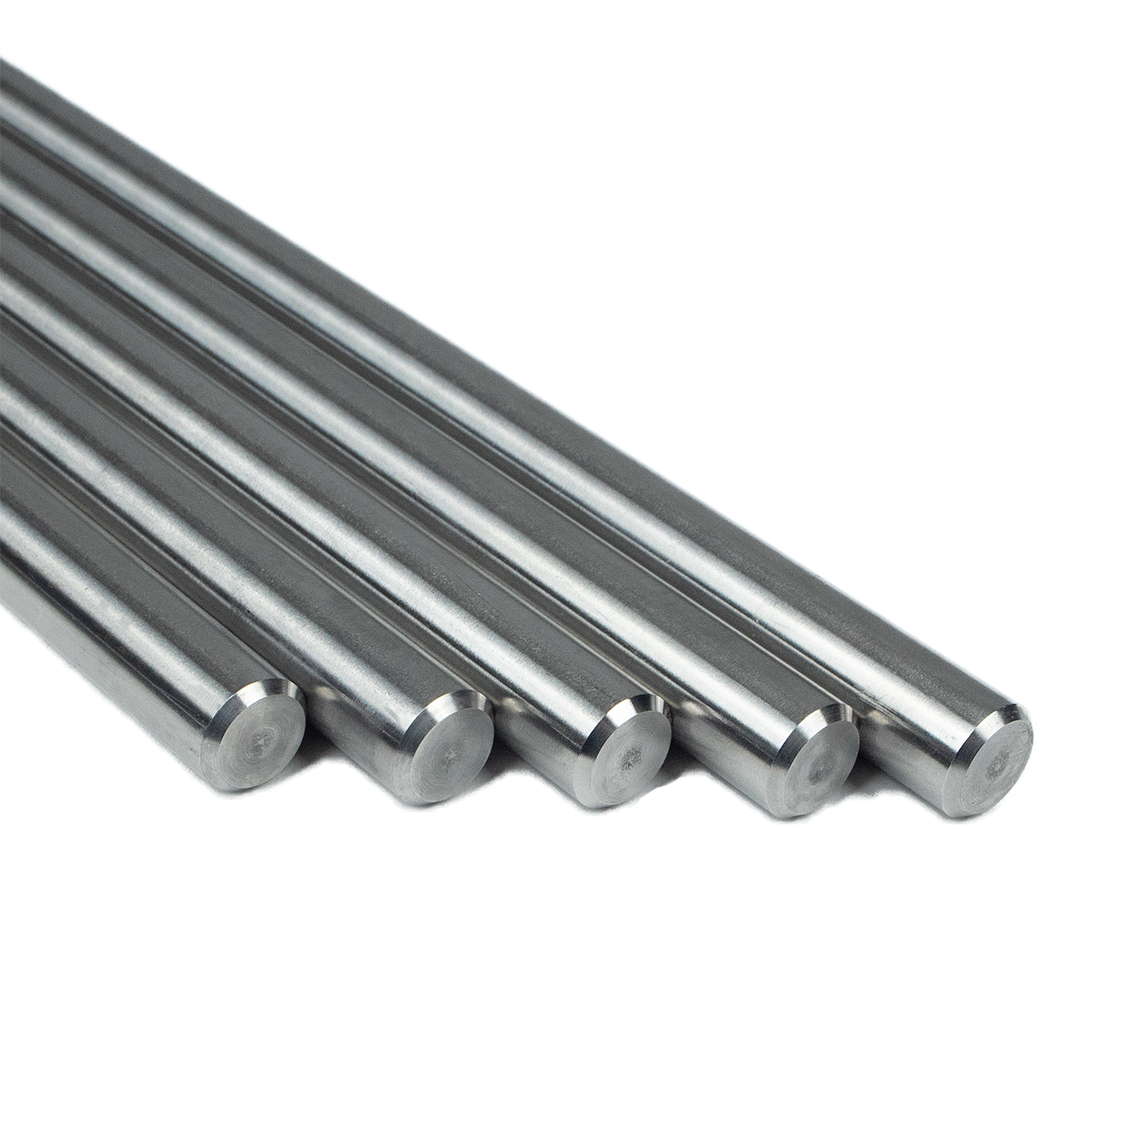 Stand Rod - Ø 15 mm, length 1000 mm - stainless steel